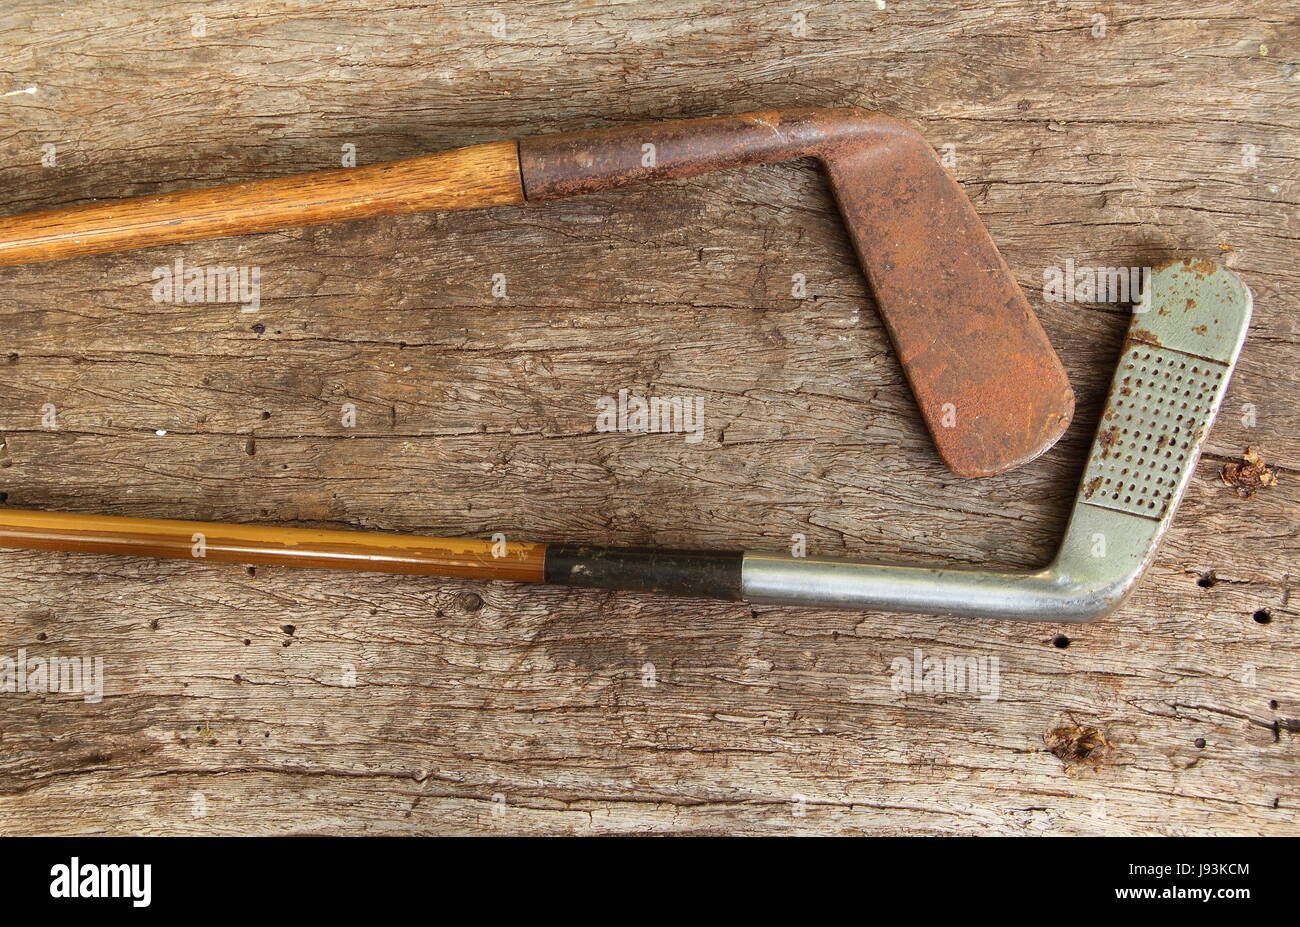 Retro hickory shafted golf clubs Stock Photo